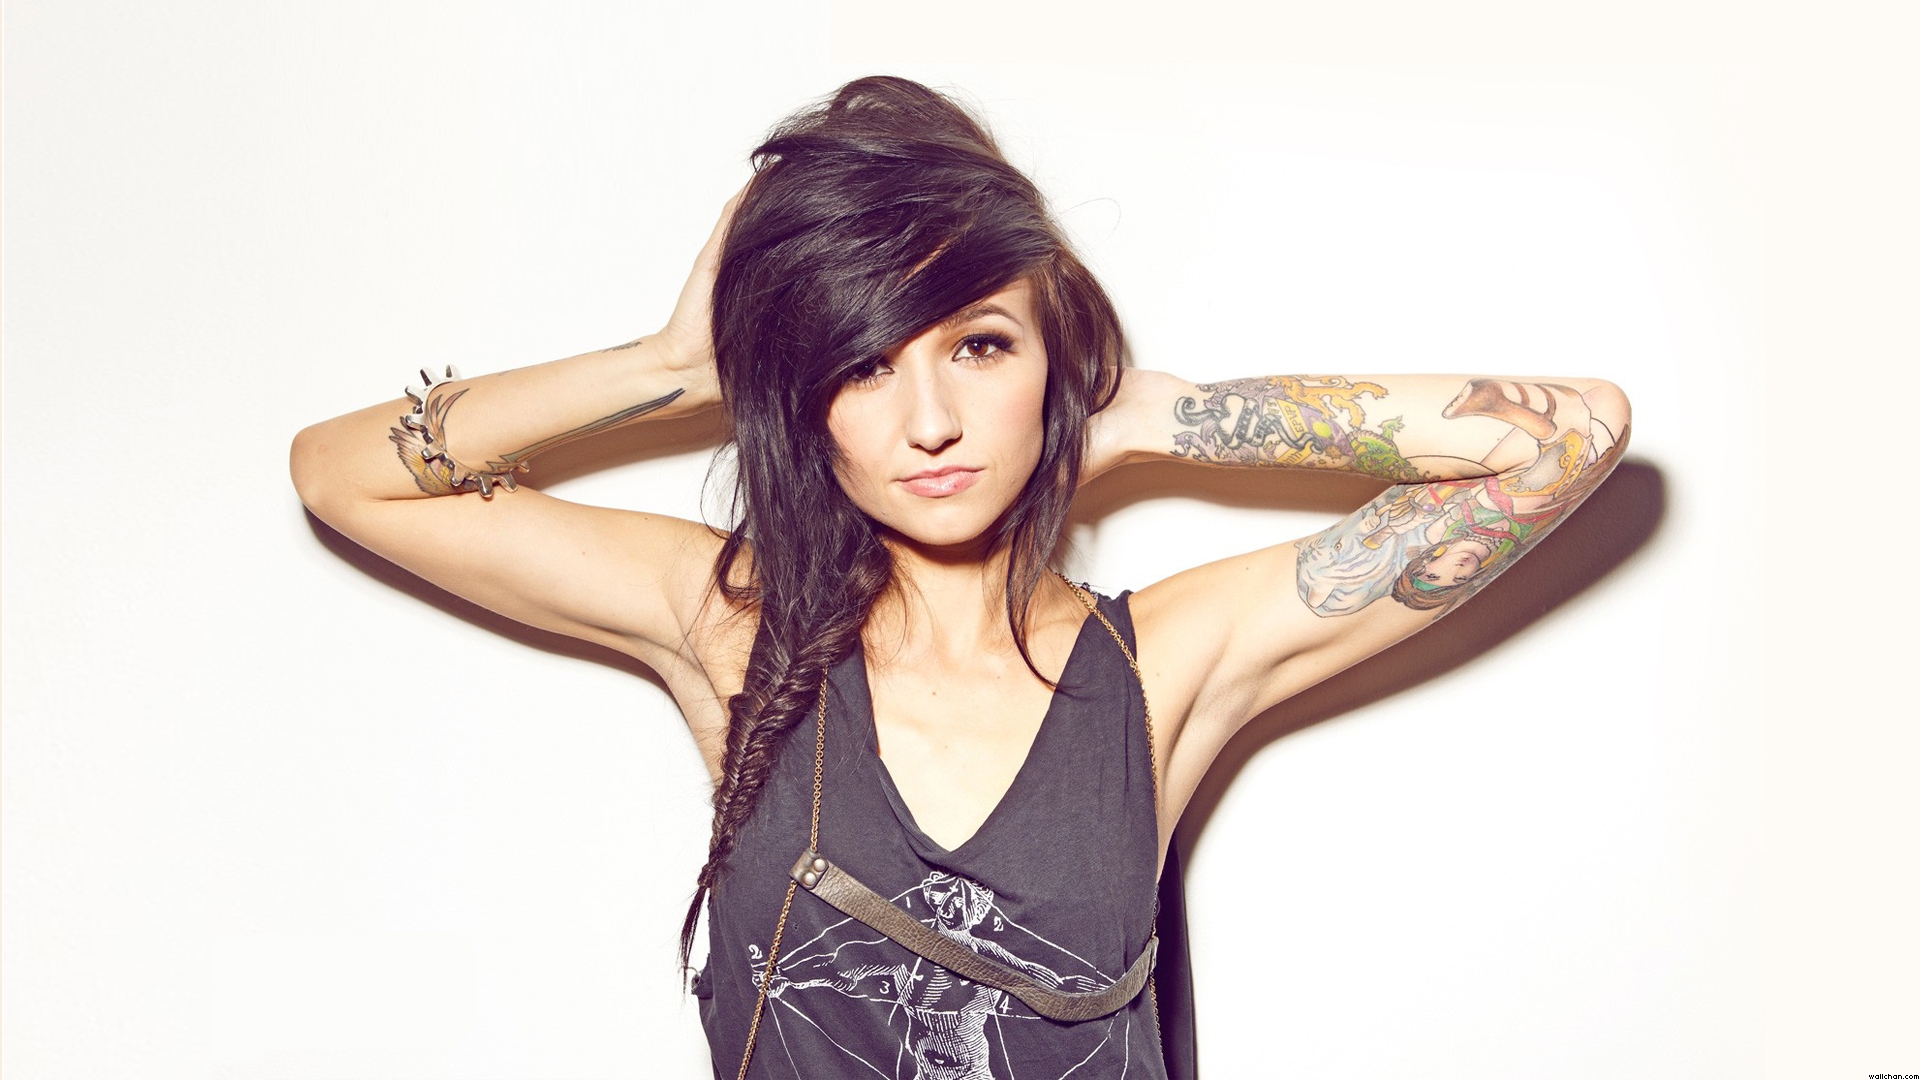 The Hot Chick from Lights